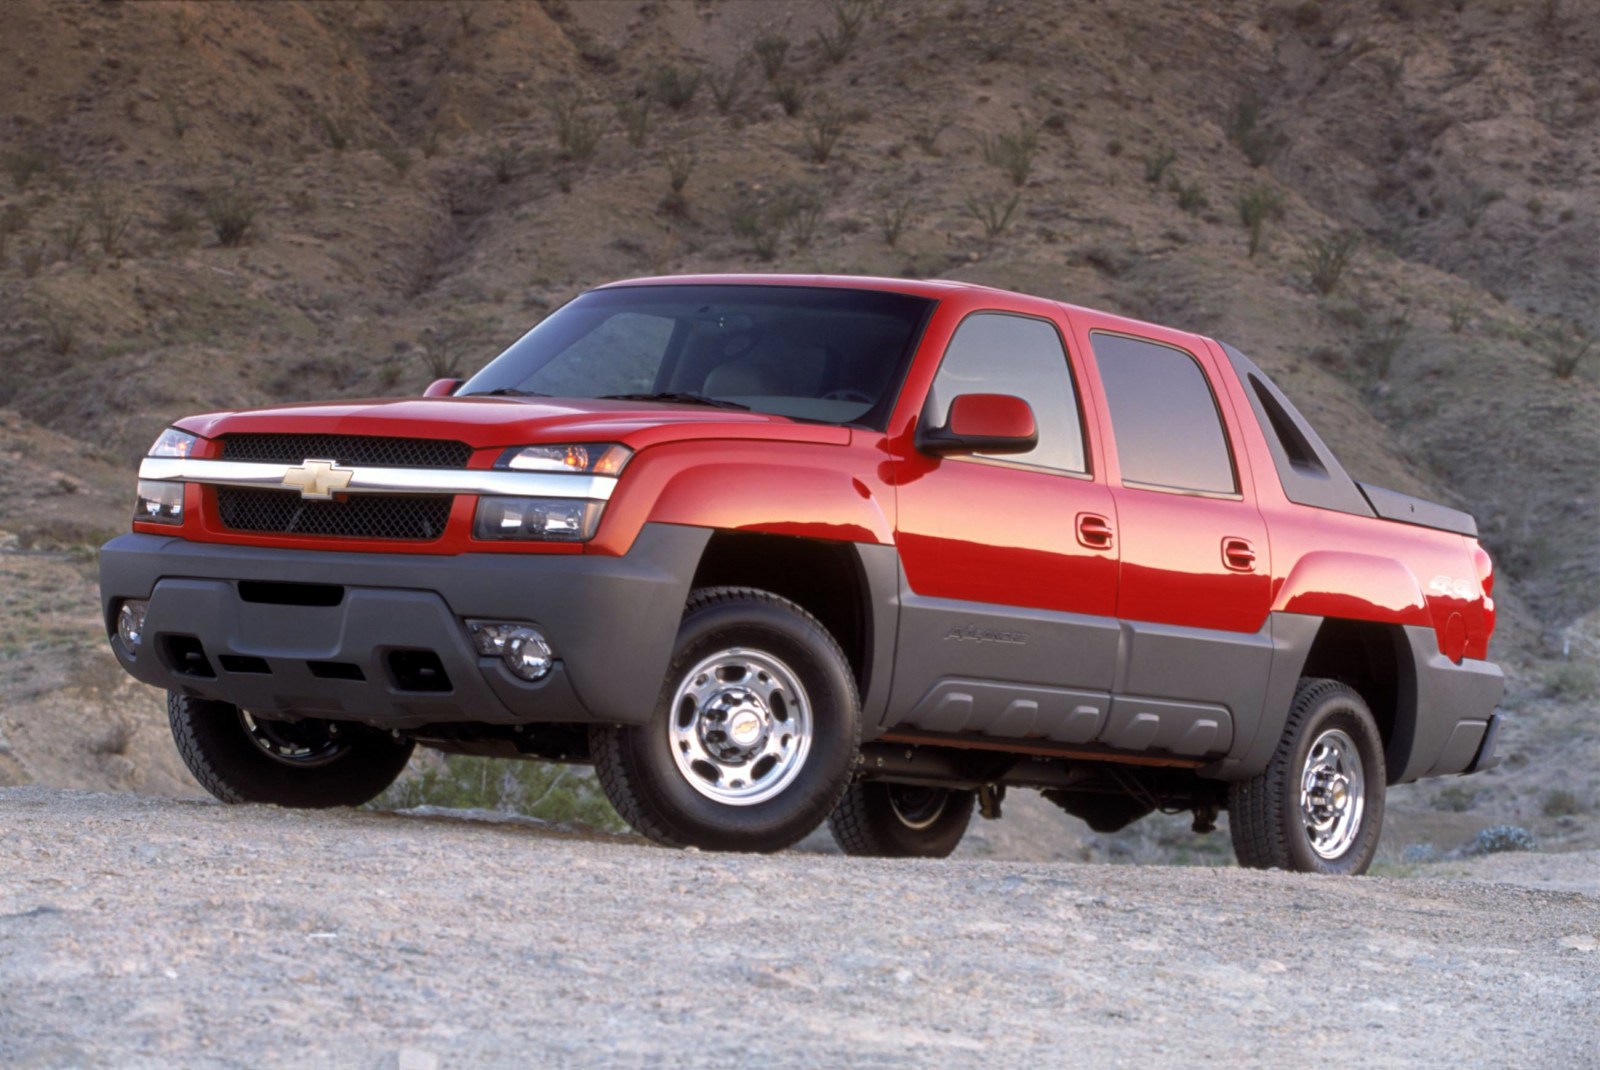 Mountain of Torque: Remembering the Short-Lived "Big-Block" Chevrolet 2003 Chevy Avalanche 2500 Towing Capacity